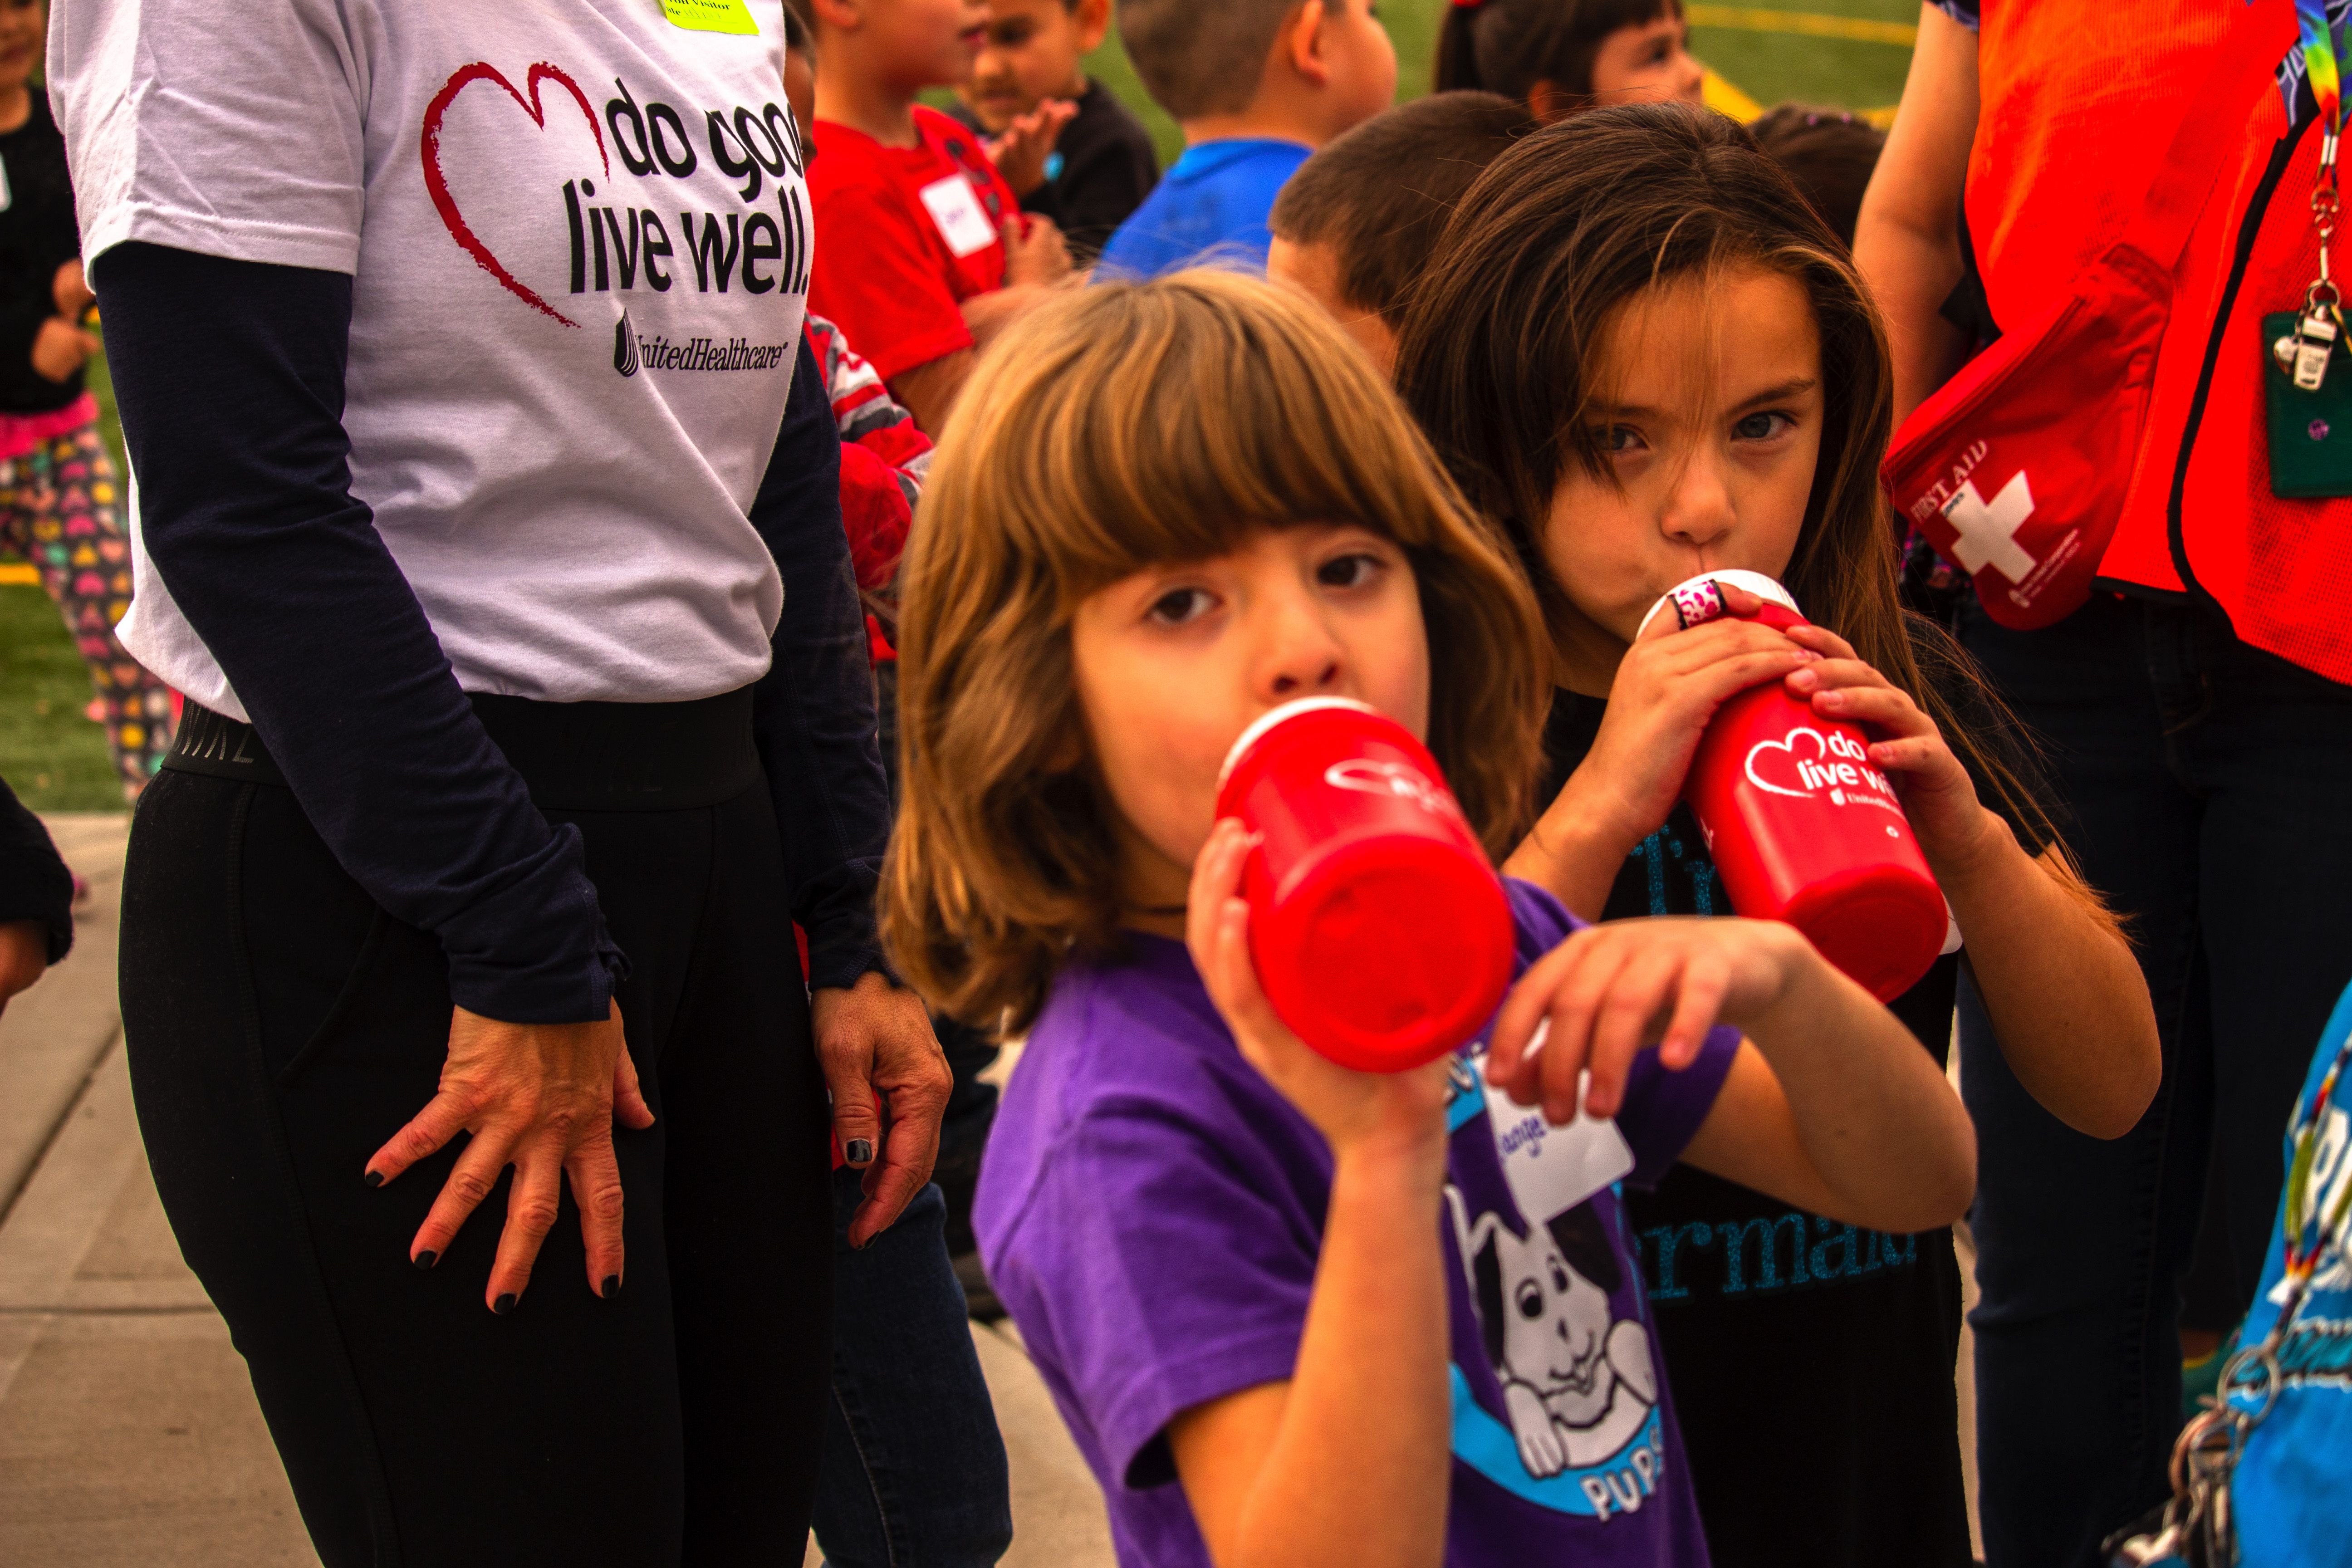 Students were encouraged to take at least one water break per session. Image by Viridiana Vidales Coyt, United States, 2017.